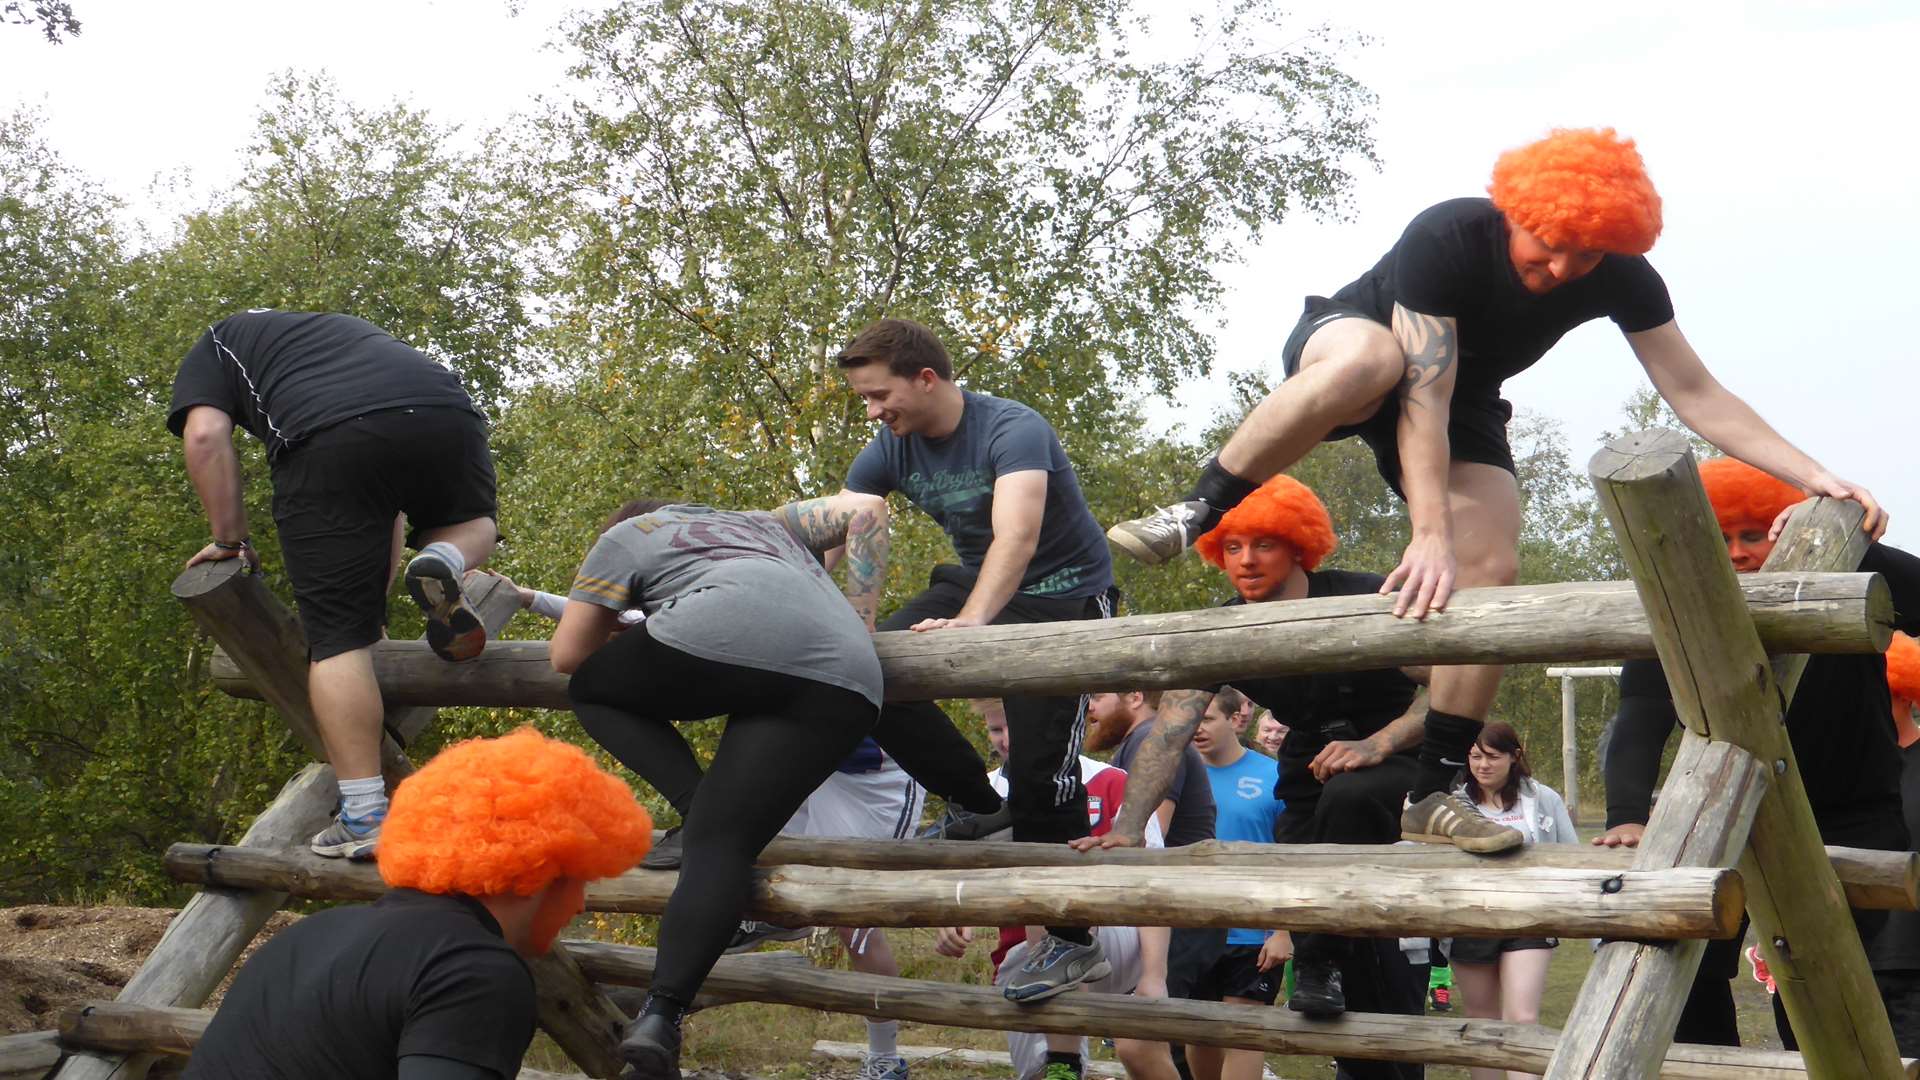 Booking is now open for the 2016 KM Assault Course Challenge which is staged at Betteshanger Park, near Deal on Saturday, October 1.